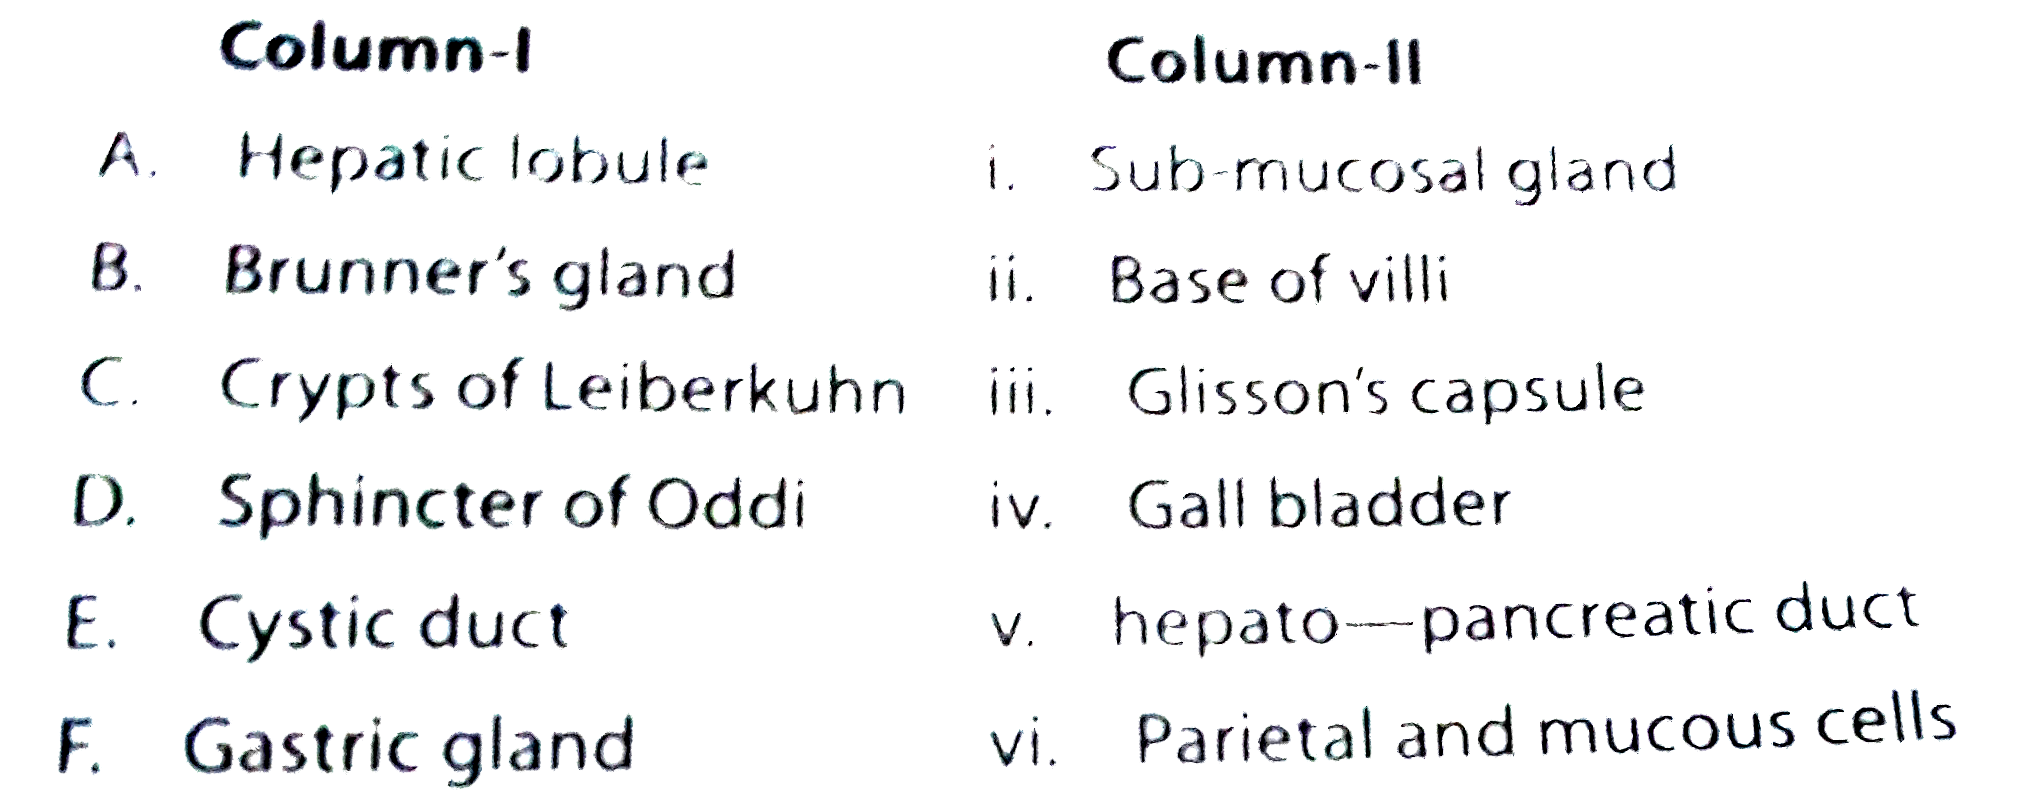 Match the entities of column I with column II and select the right answer from the codes given below